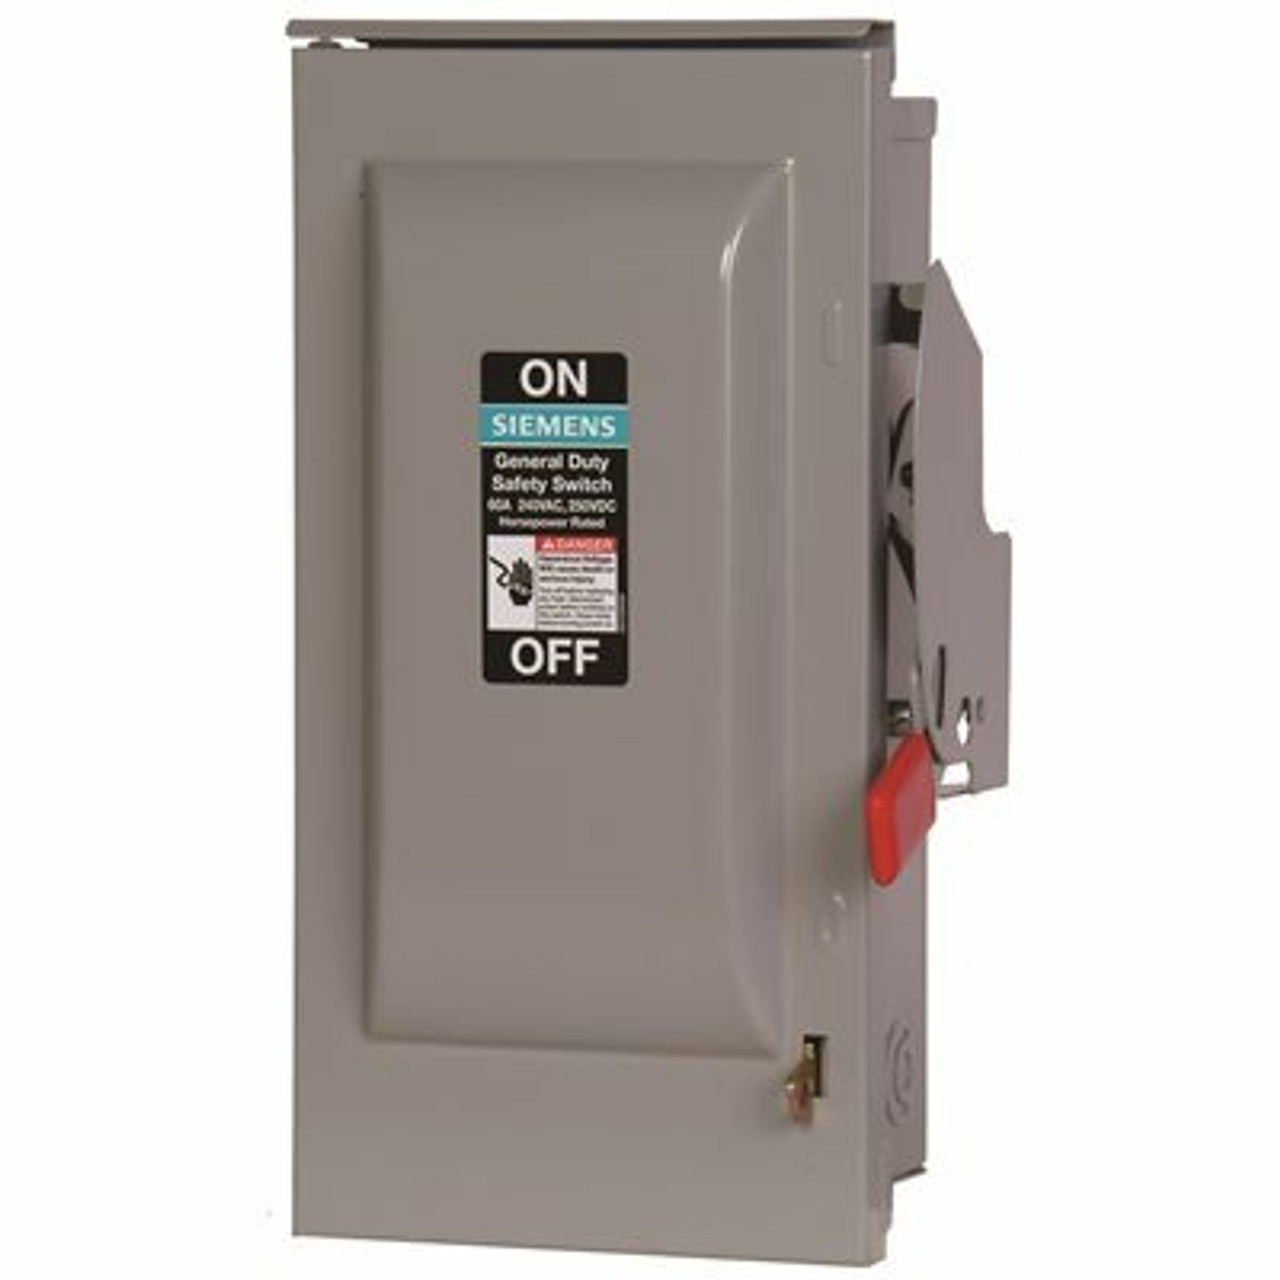 Siemens General Duty 100 Amp 240-Volt 2-Pole Outdoor Fusible Safety Switch With Neutral